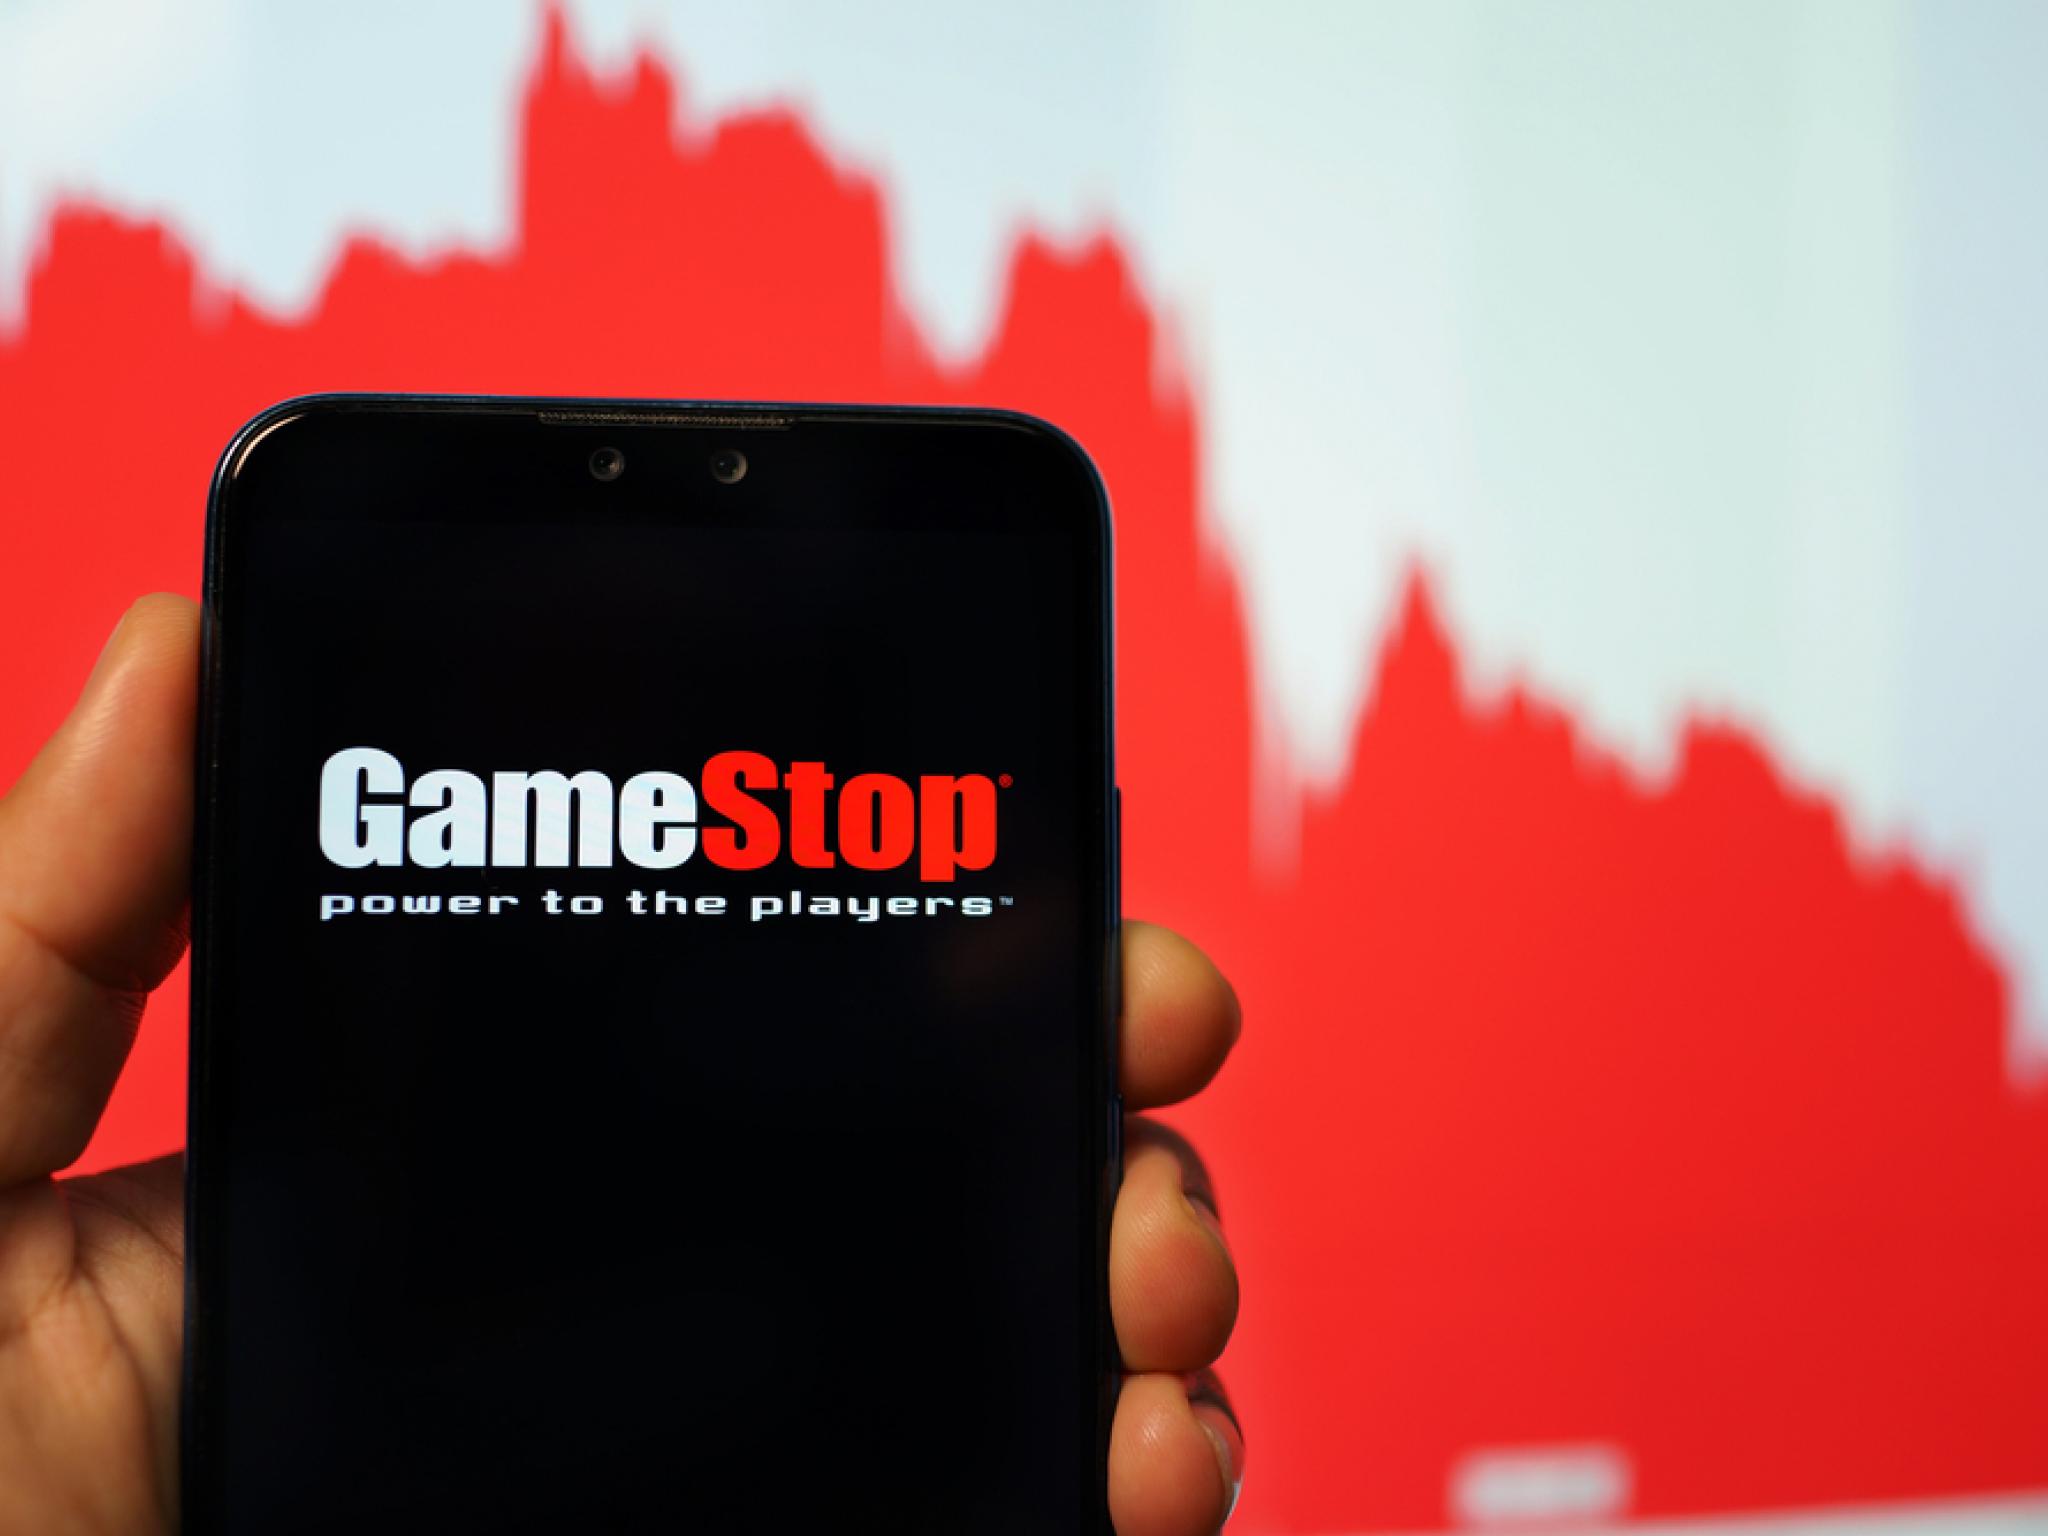  why-gamestop-shares-are-trading-lower-by-over-22-here-are-other-stocks-moving-in-fridays-mid-day-session 